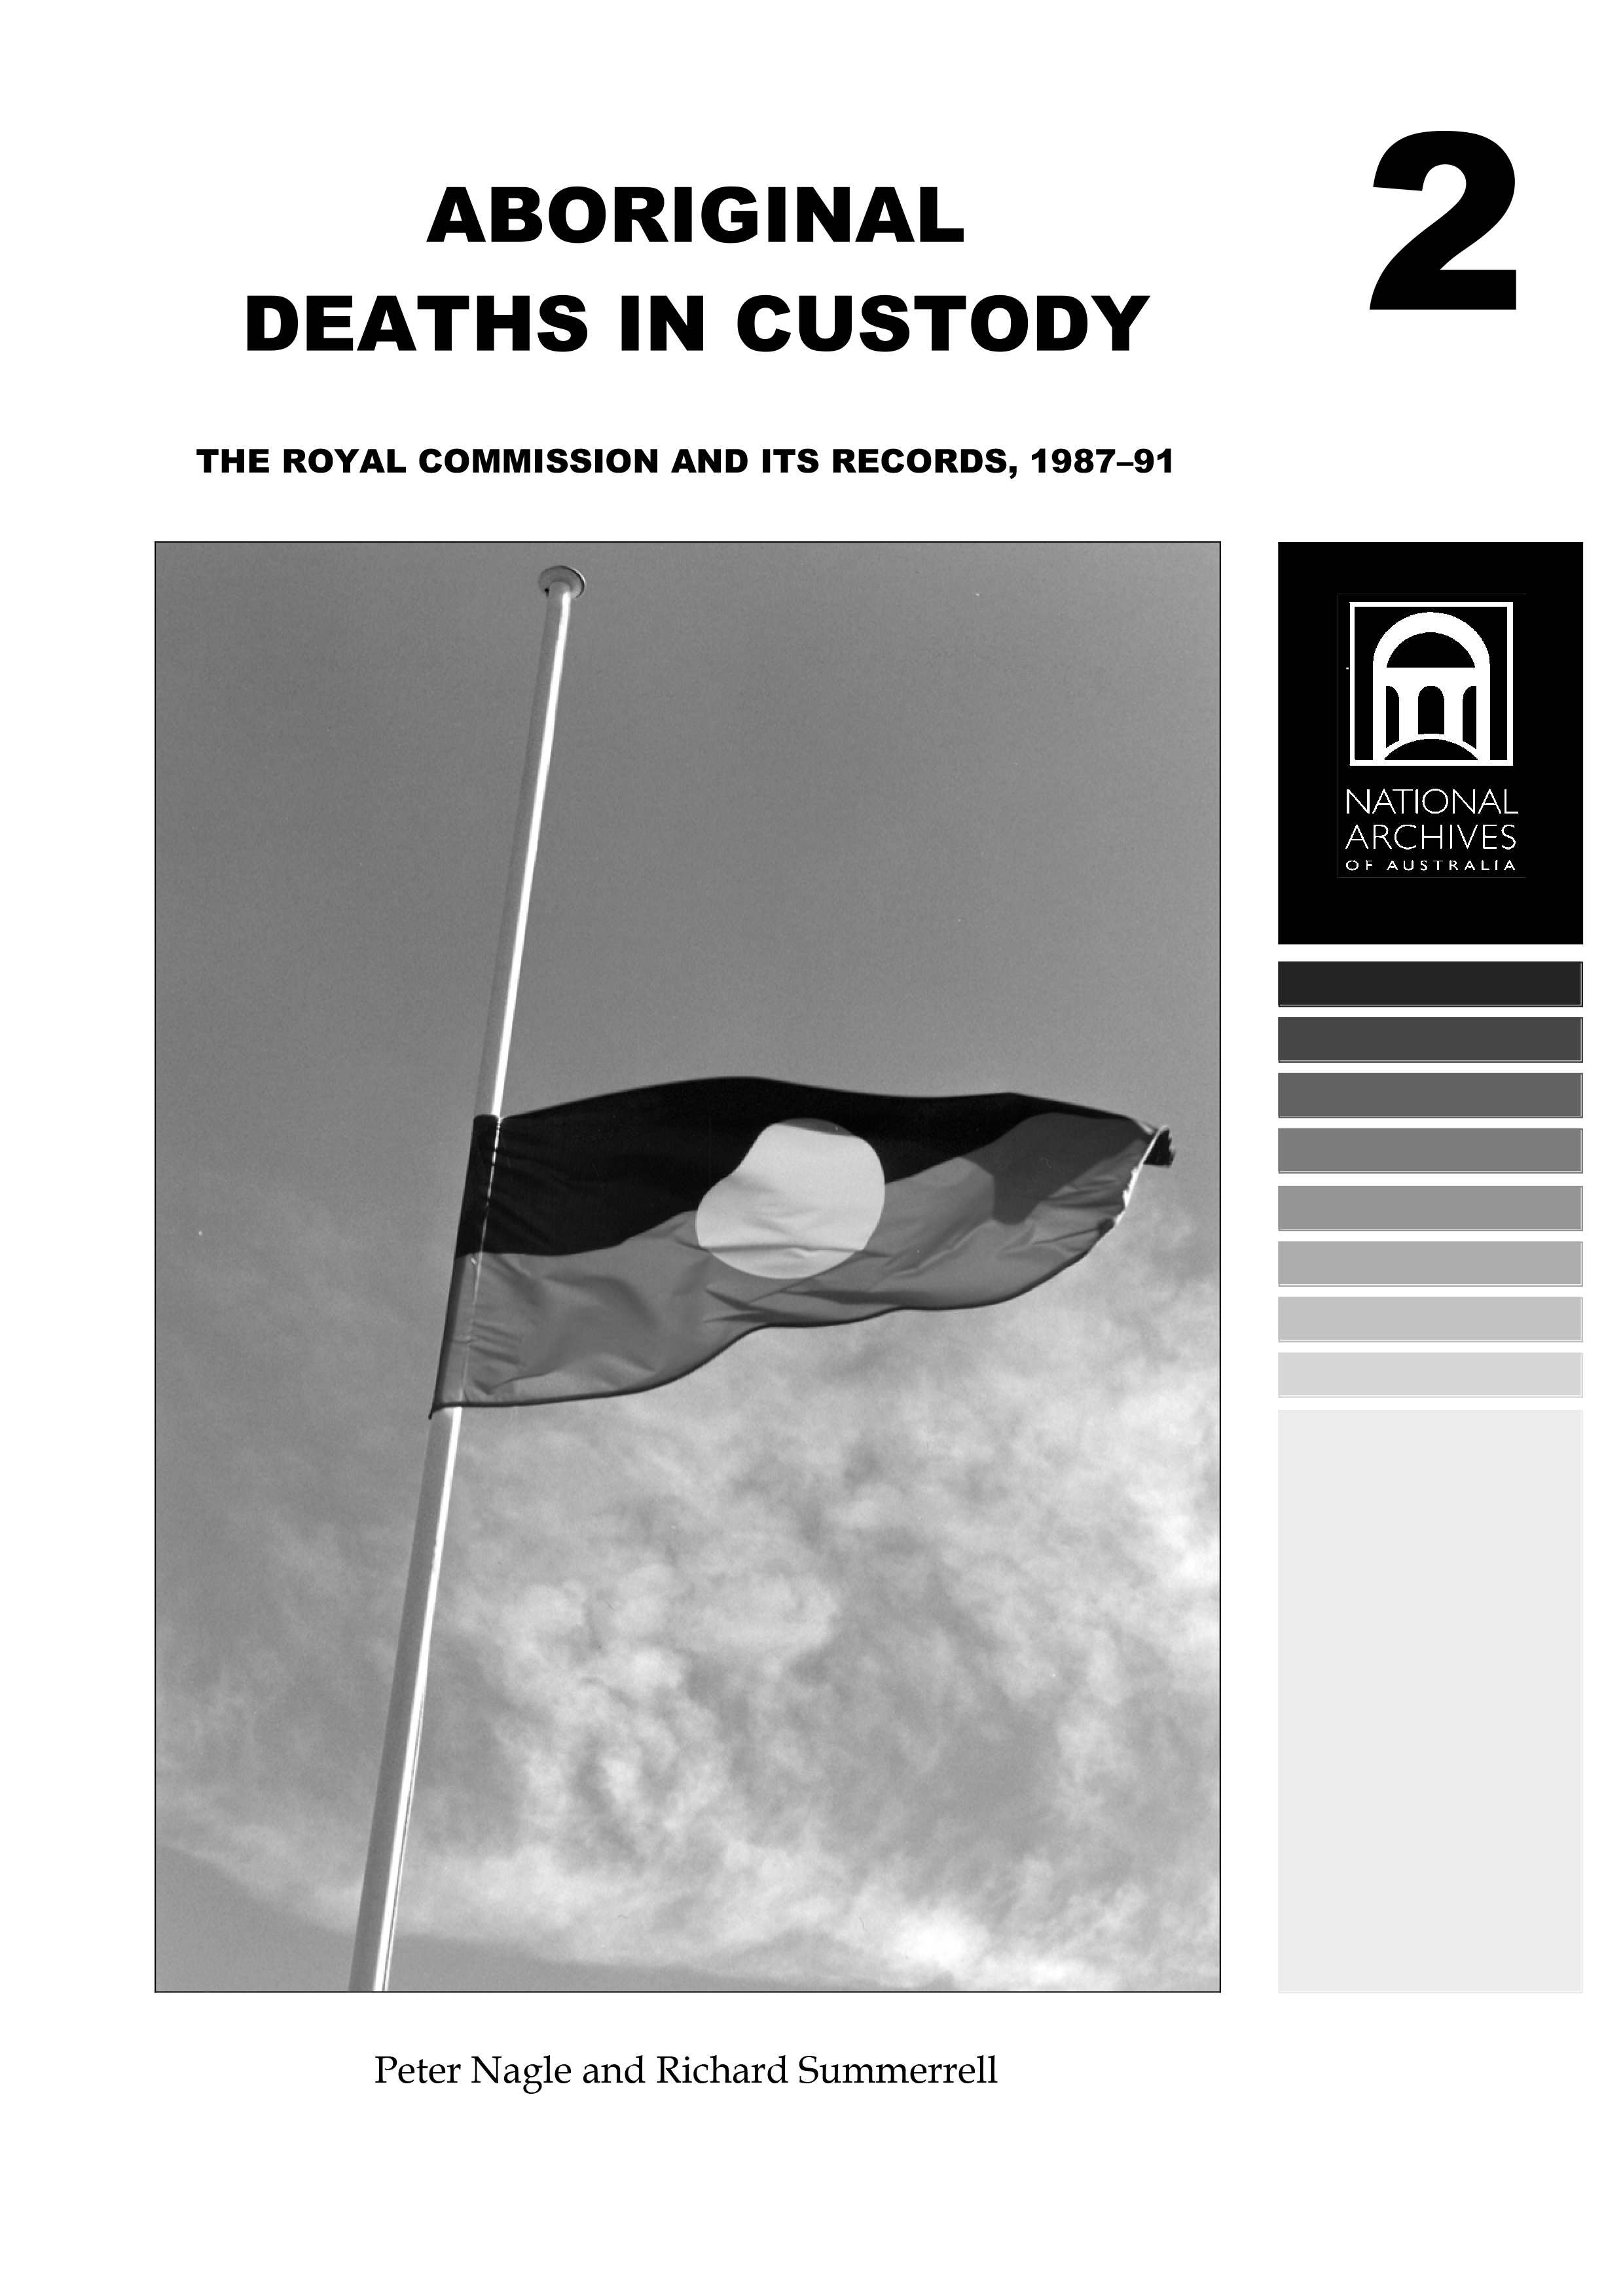 Cover of Aboriginal Deaths in Custody — The Royal Commission and its Records 1987–91, by Peter Nagle and Richard Summerrell